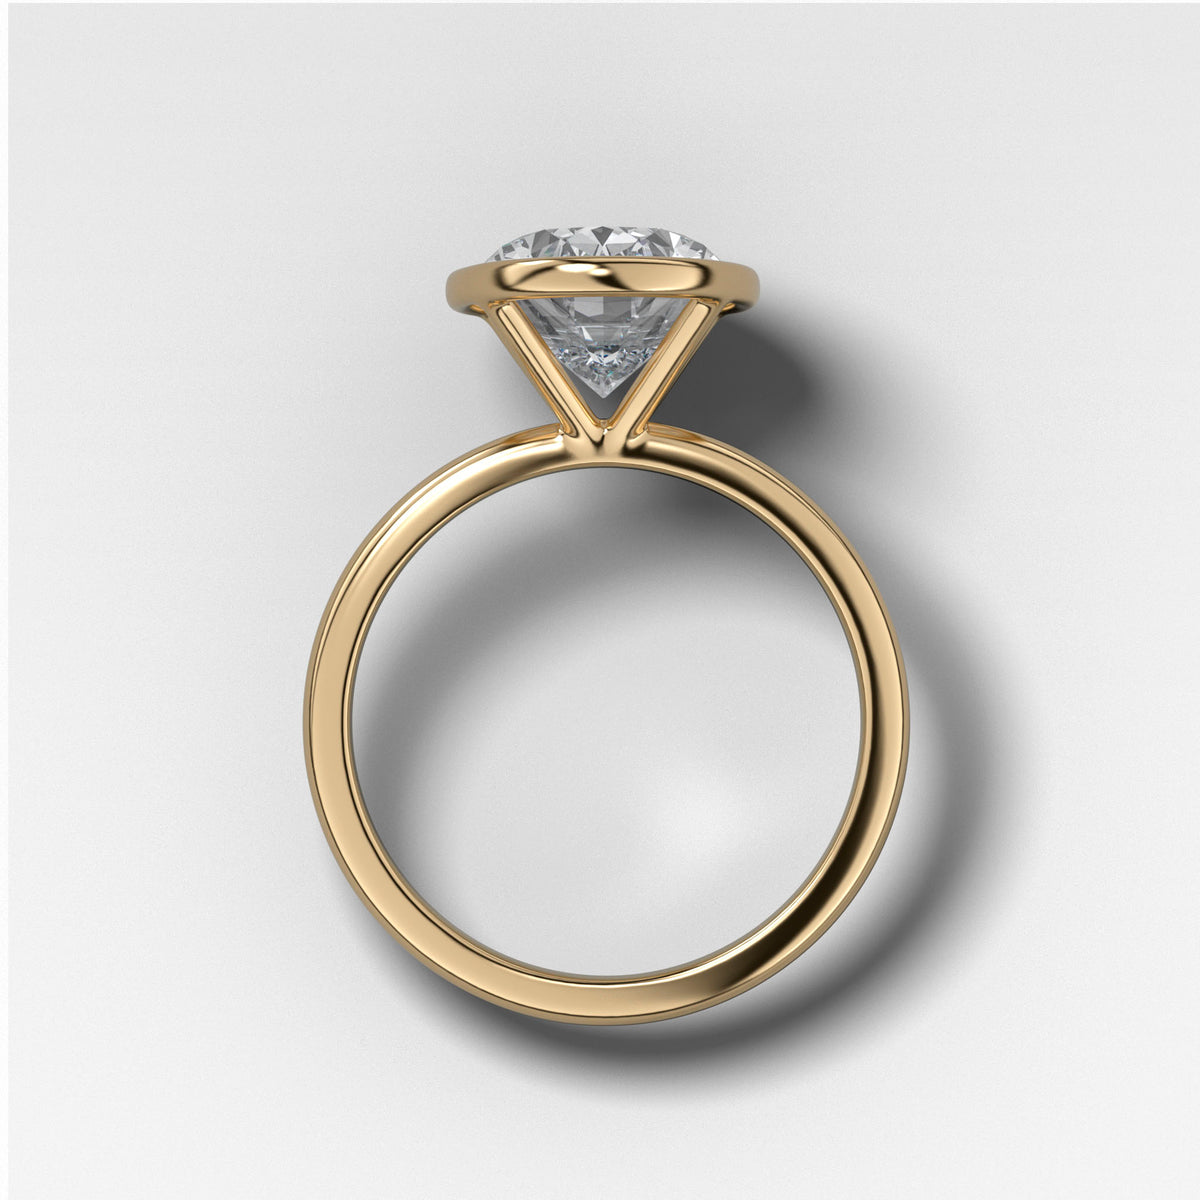 Penumbra Bezel Set Engagement Ring With Oval Cut